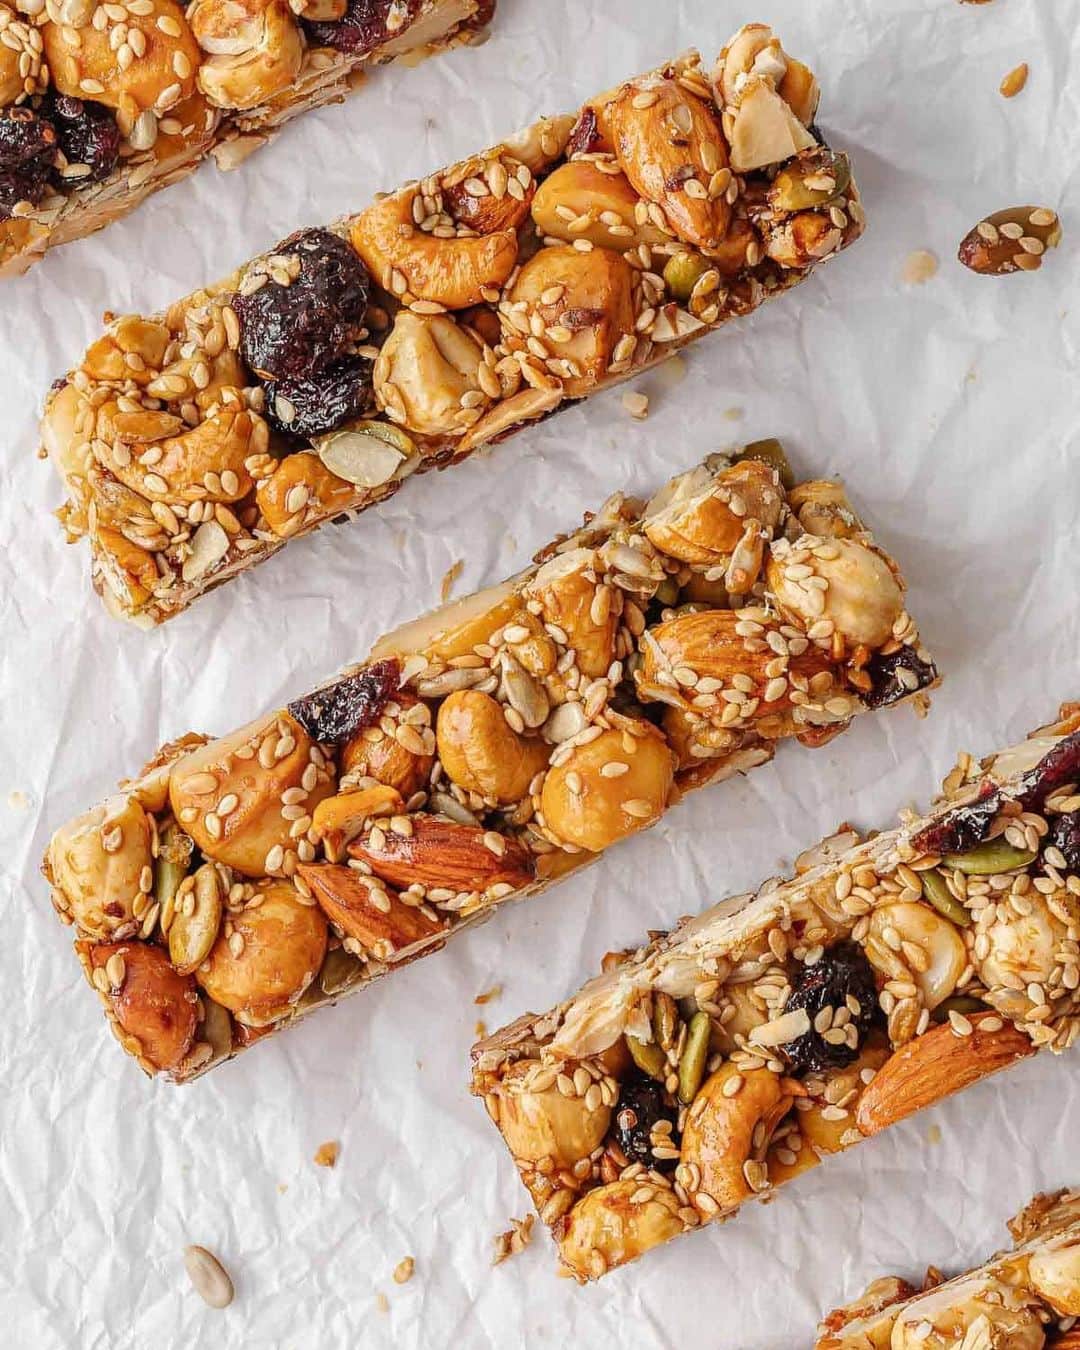 Easy Recipesのインスタグラム：「If you love nuts and crave sweet and salty snacks, these Fruit and Nut Bars are for you. Seed and nut bars are a good source of protein, fiber, and healthy fats, and they contain a variety of vitamins and minerals. This KIND bar copycat recipe is made with various seeds and nuts and sweetened with dried cranberries and a touch of honey!  Full recipe link in m bio @cookinwithmima  https://www.cookinwithmima.com/homemade-fruit-and-nut-bars/」